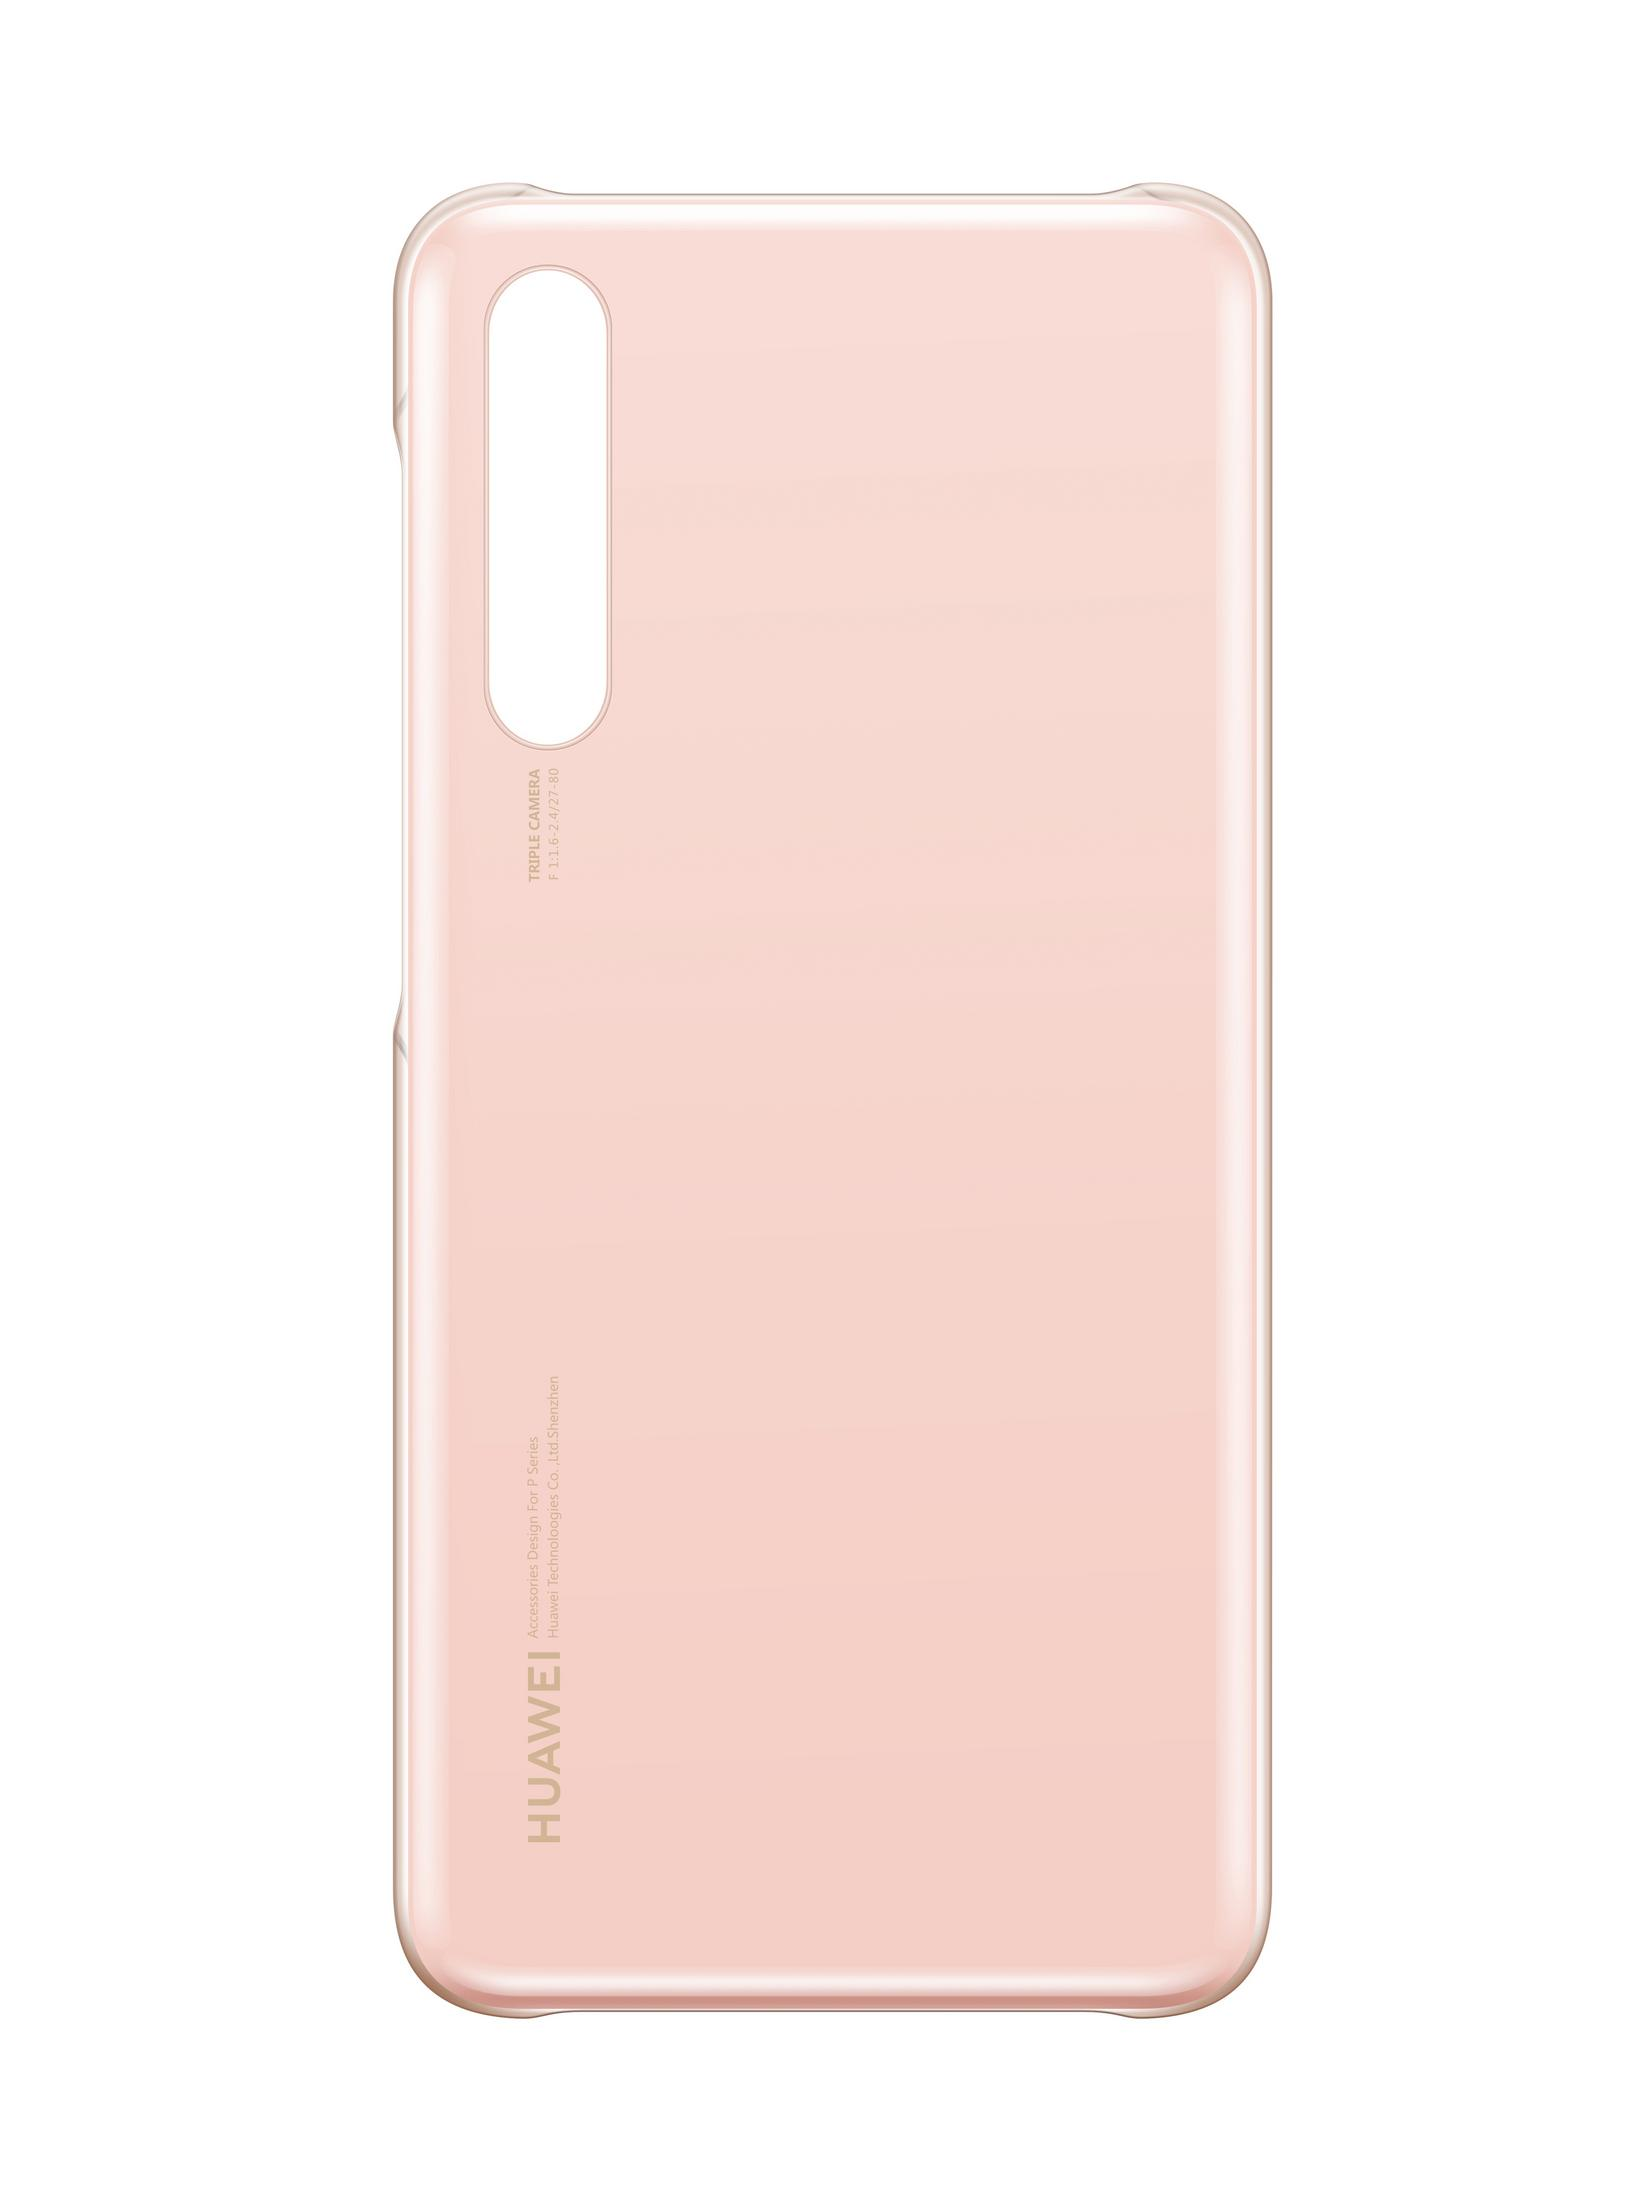 HUAWEI 51992376 Huawei, Pink Backcover, COLOR PRO P20 CASE P20 PINK, Pro,